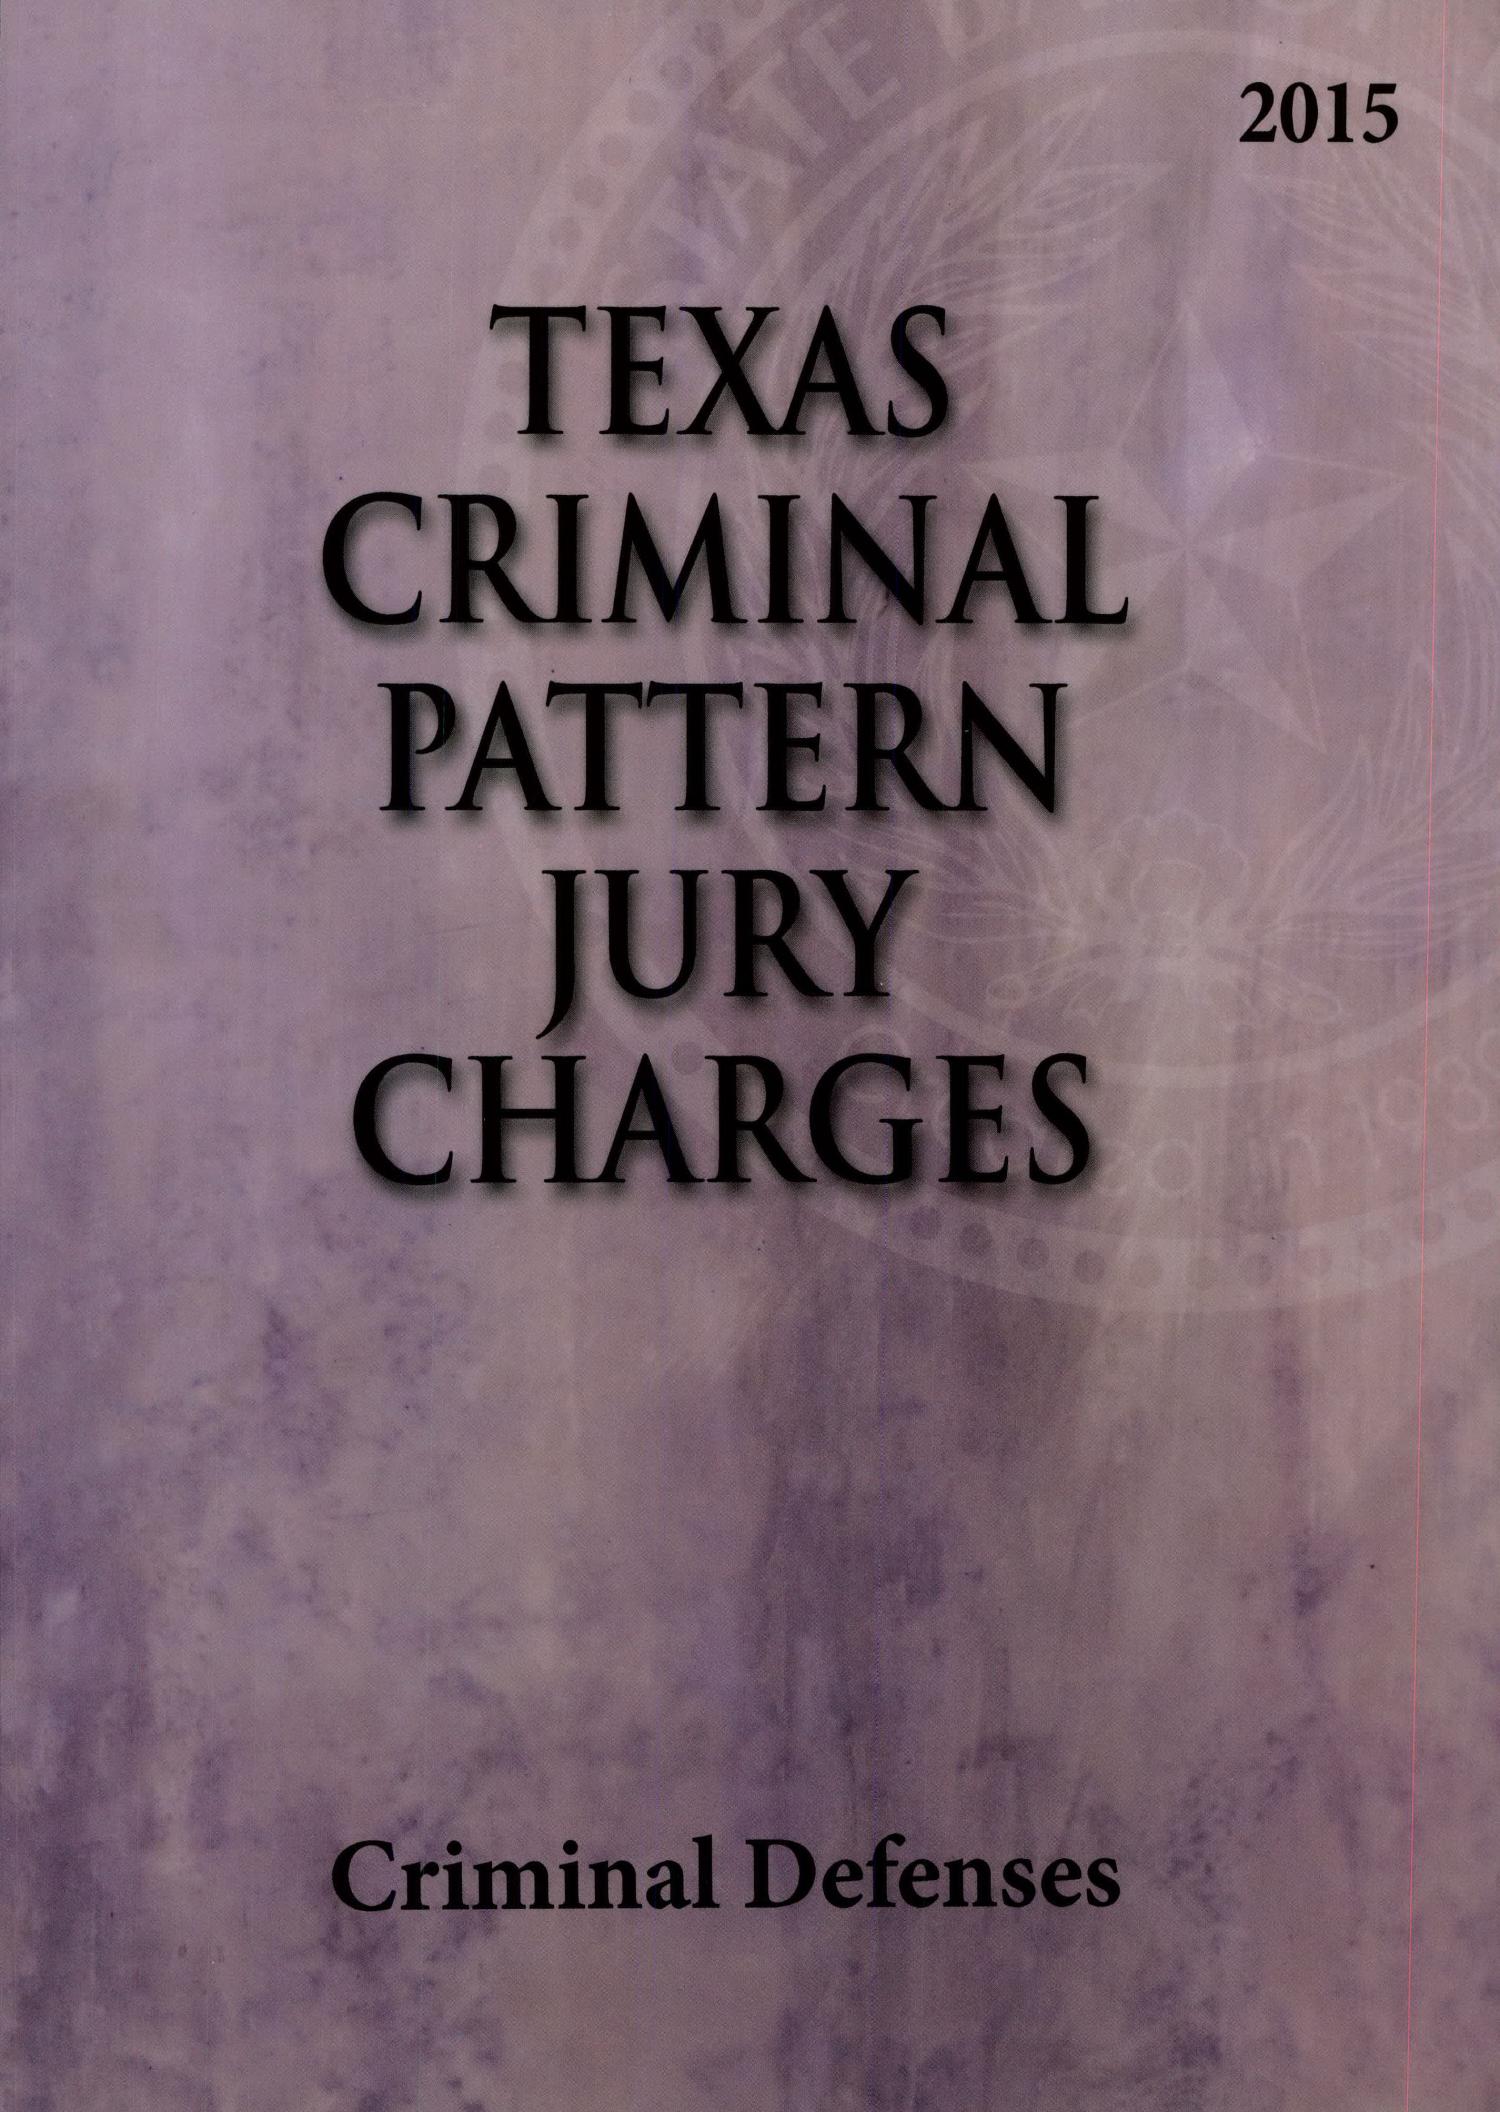 Texas Pattern Jury Charges Criminal Defenses Page Front Cover The